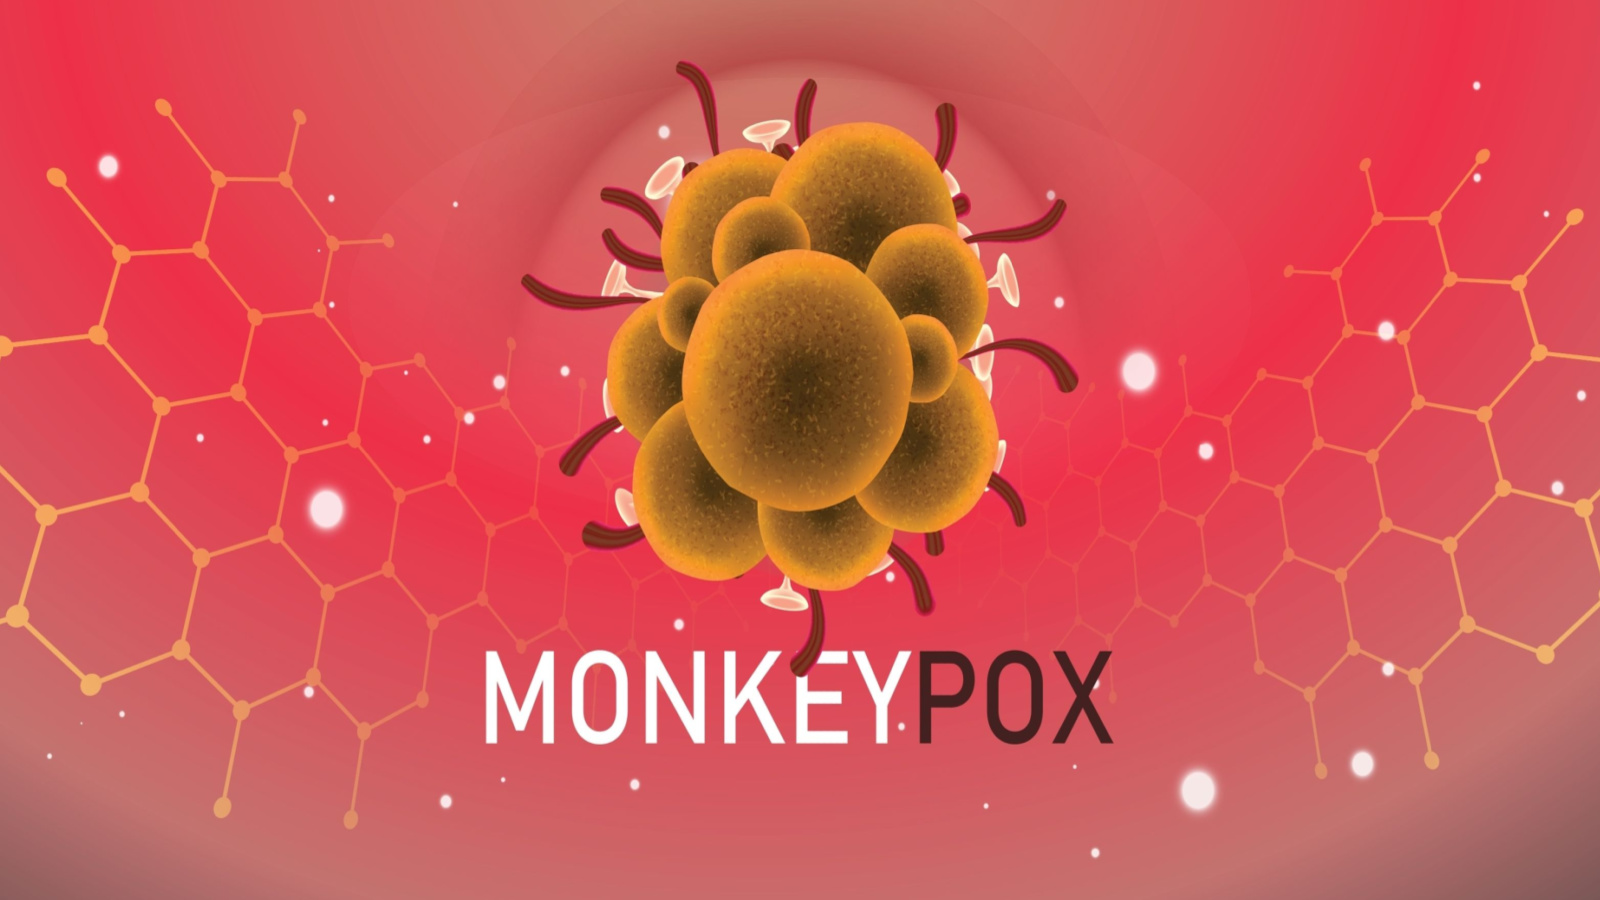 An image showing a representation of the monkeypox virus representing SIGA Stock.